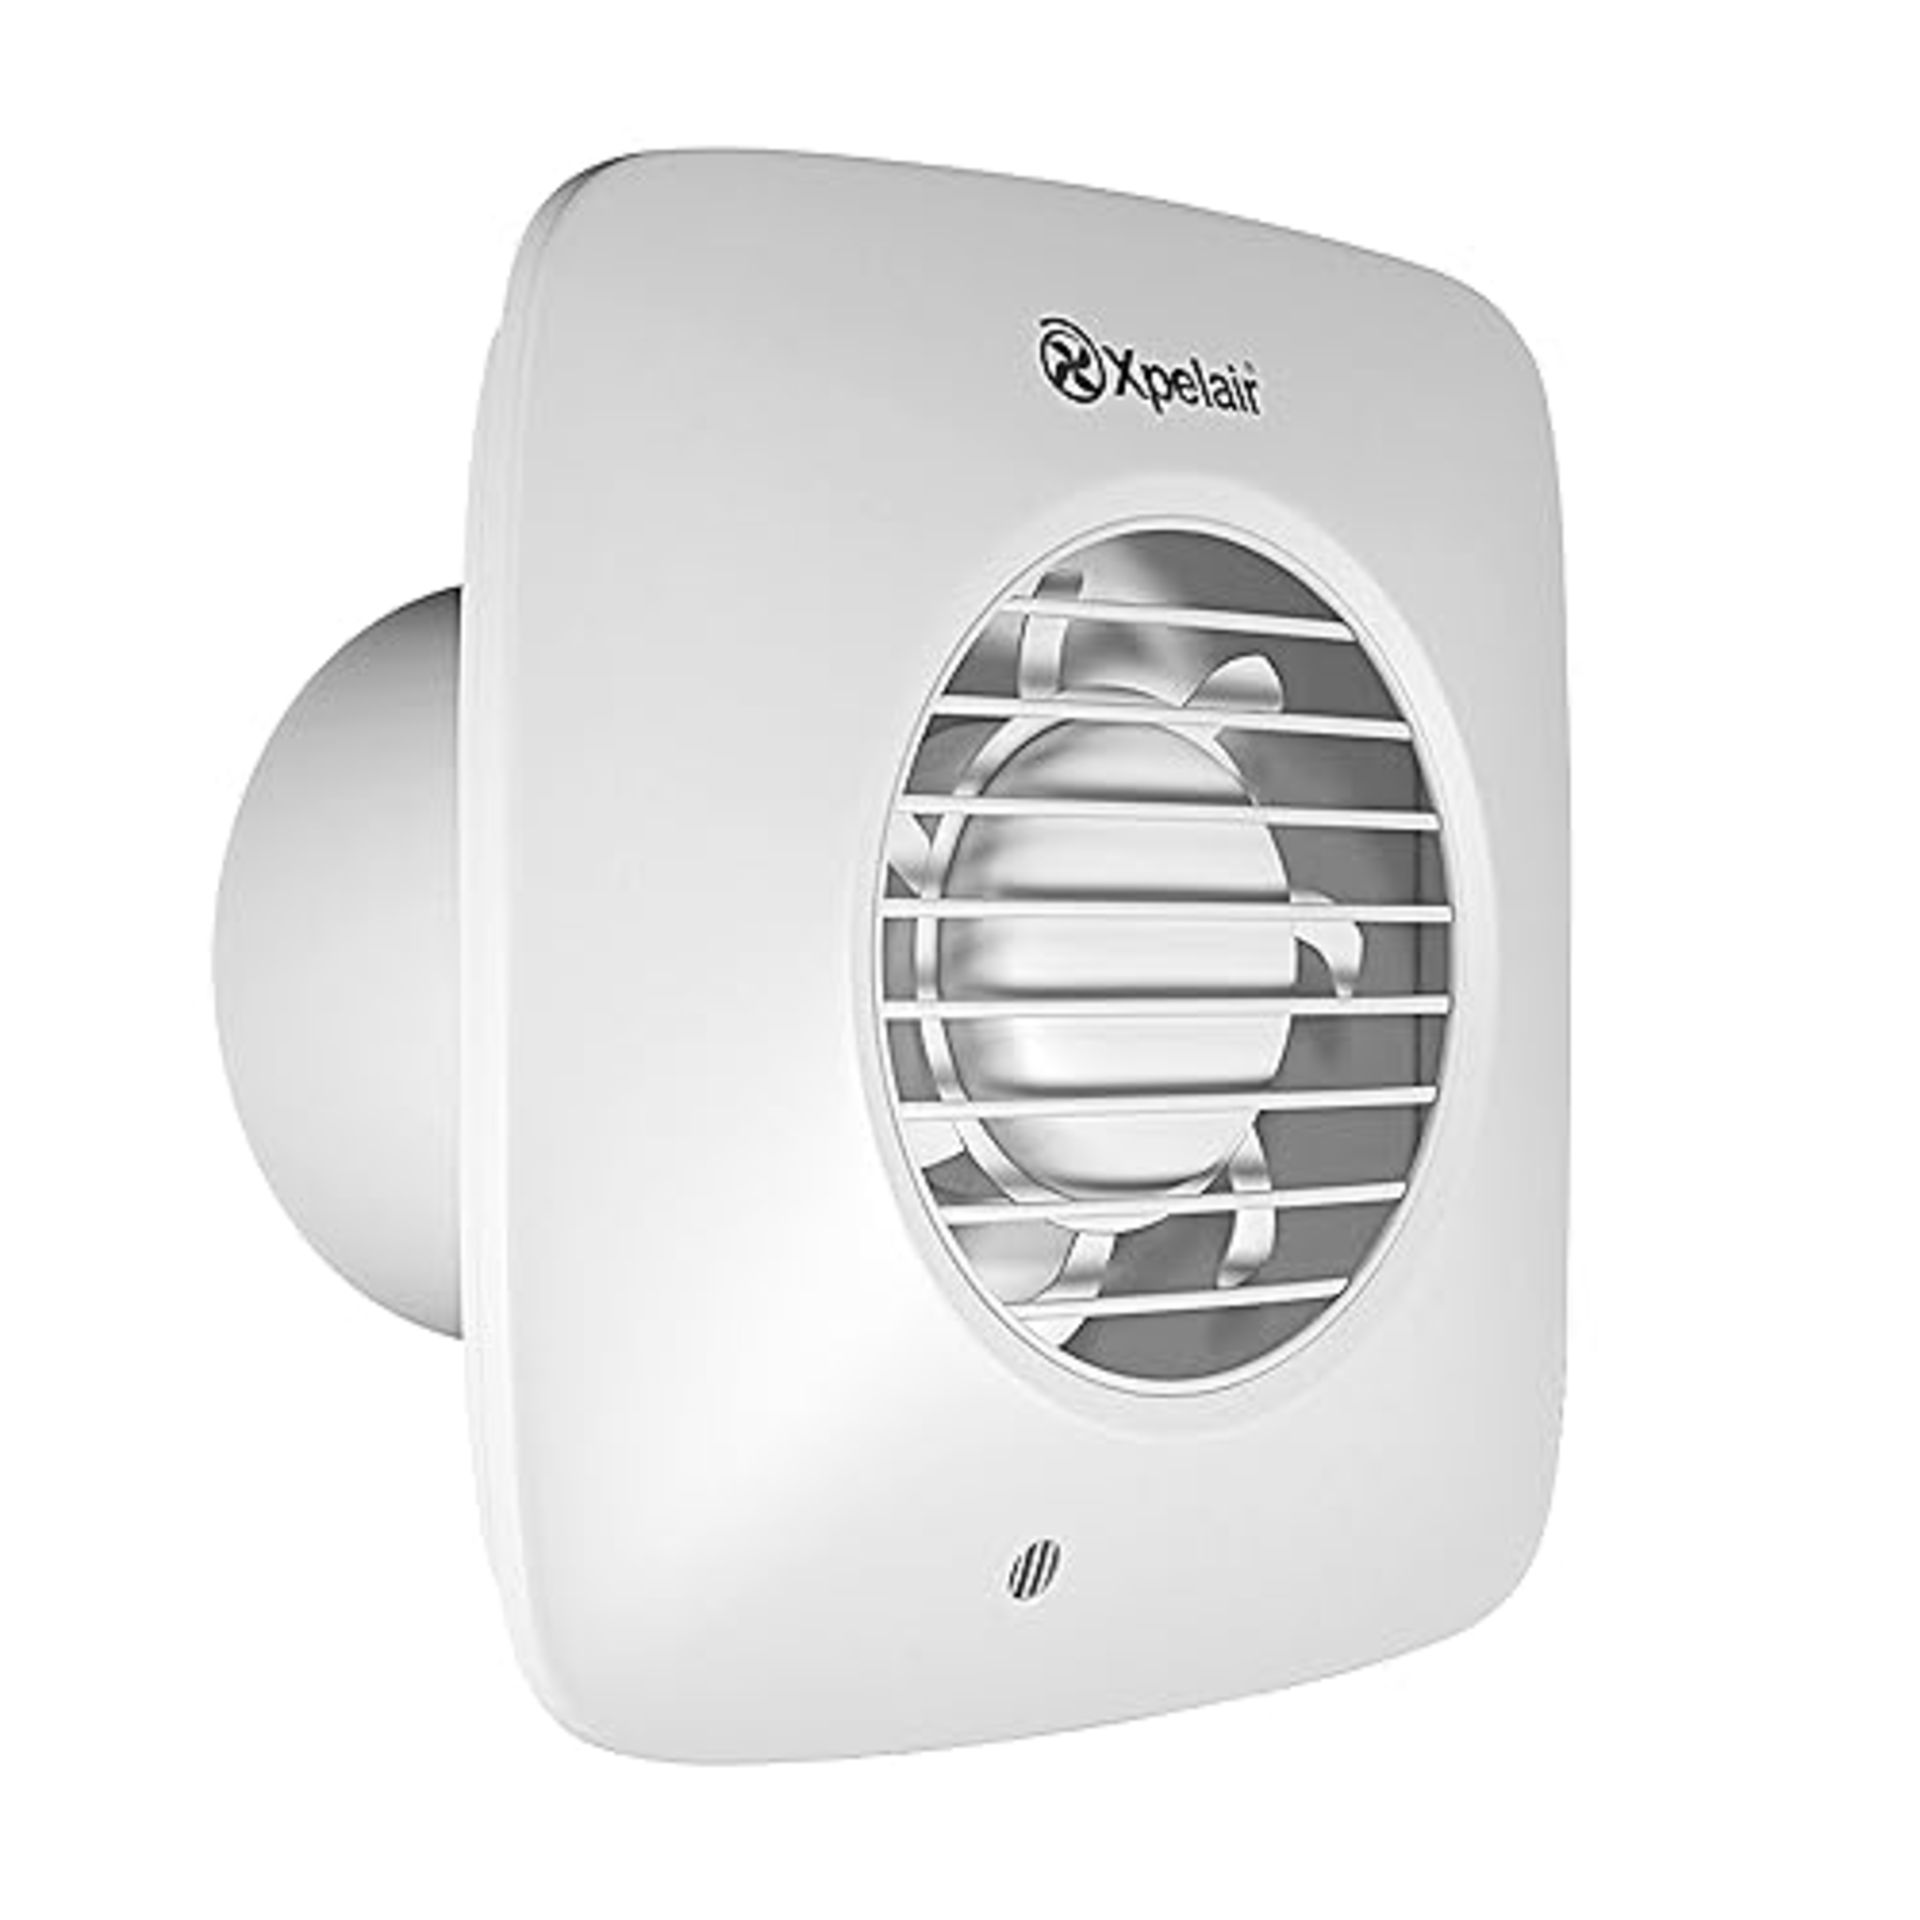 Xpelair DX100BHTS Simply Silent Bathroom Extractor Fan With Humidistat & Timer Control, Adjustabl...